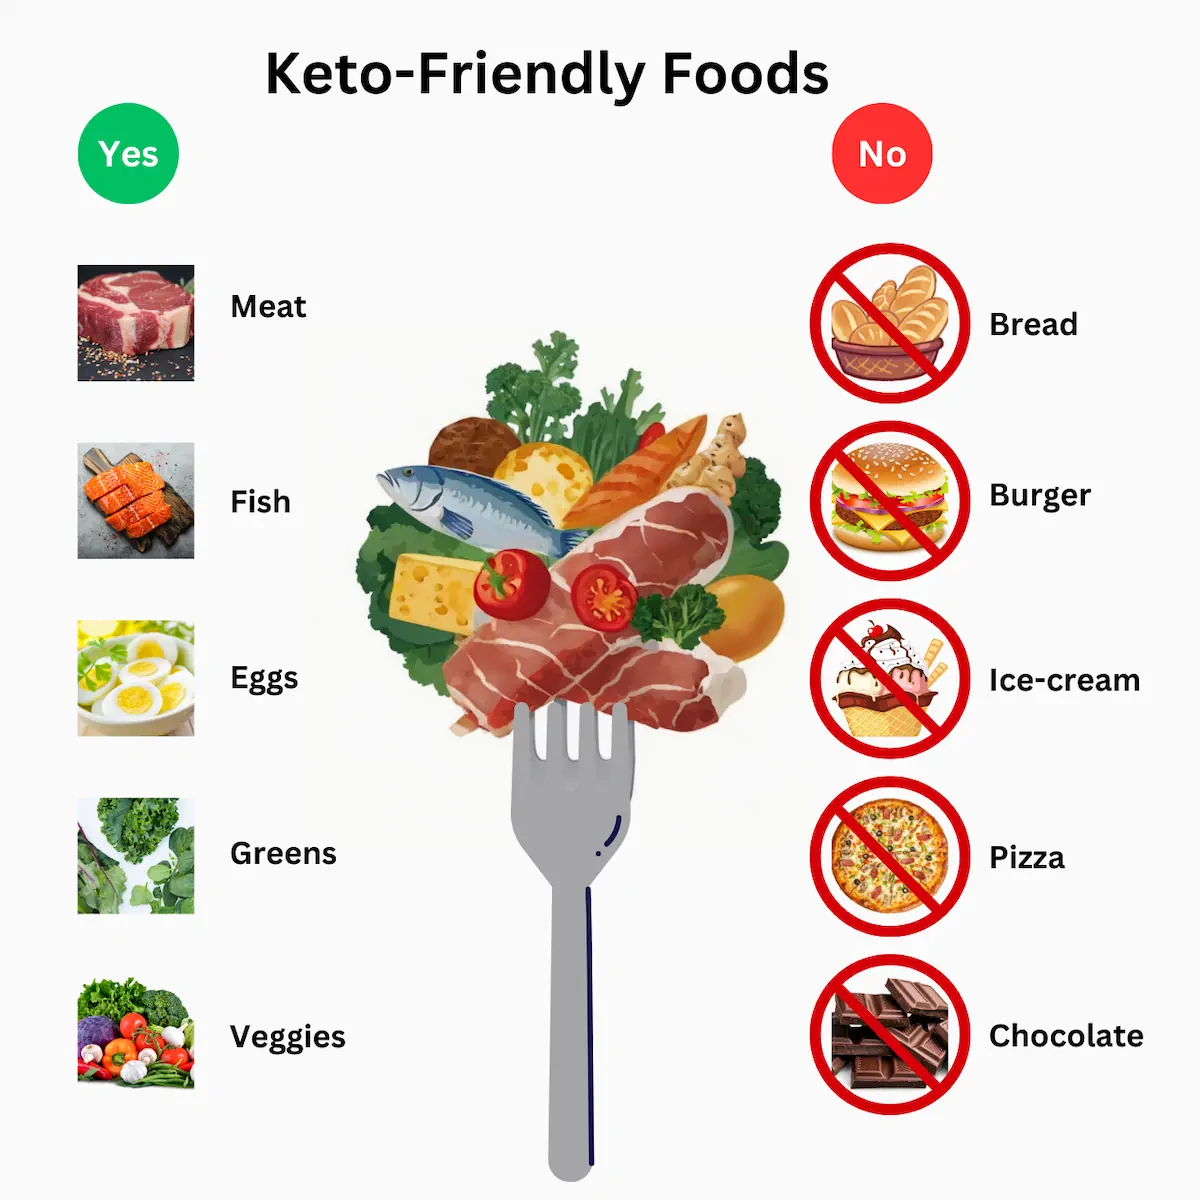 An infographic showing what to eat and what not to eat on a keto diet.